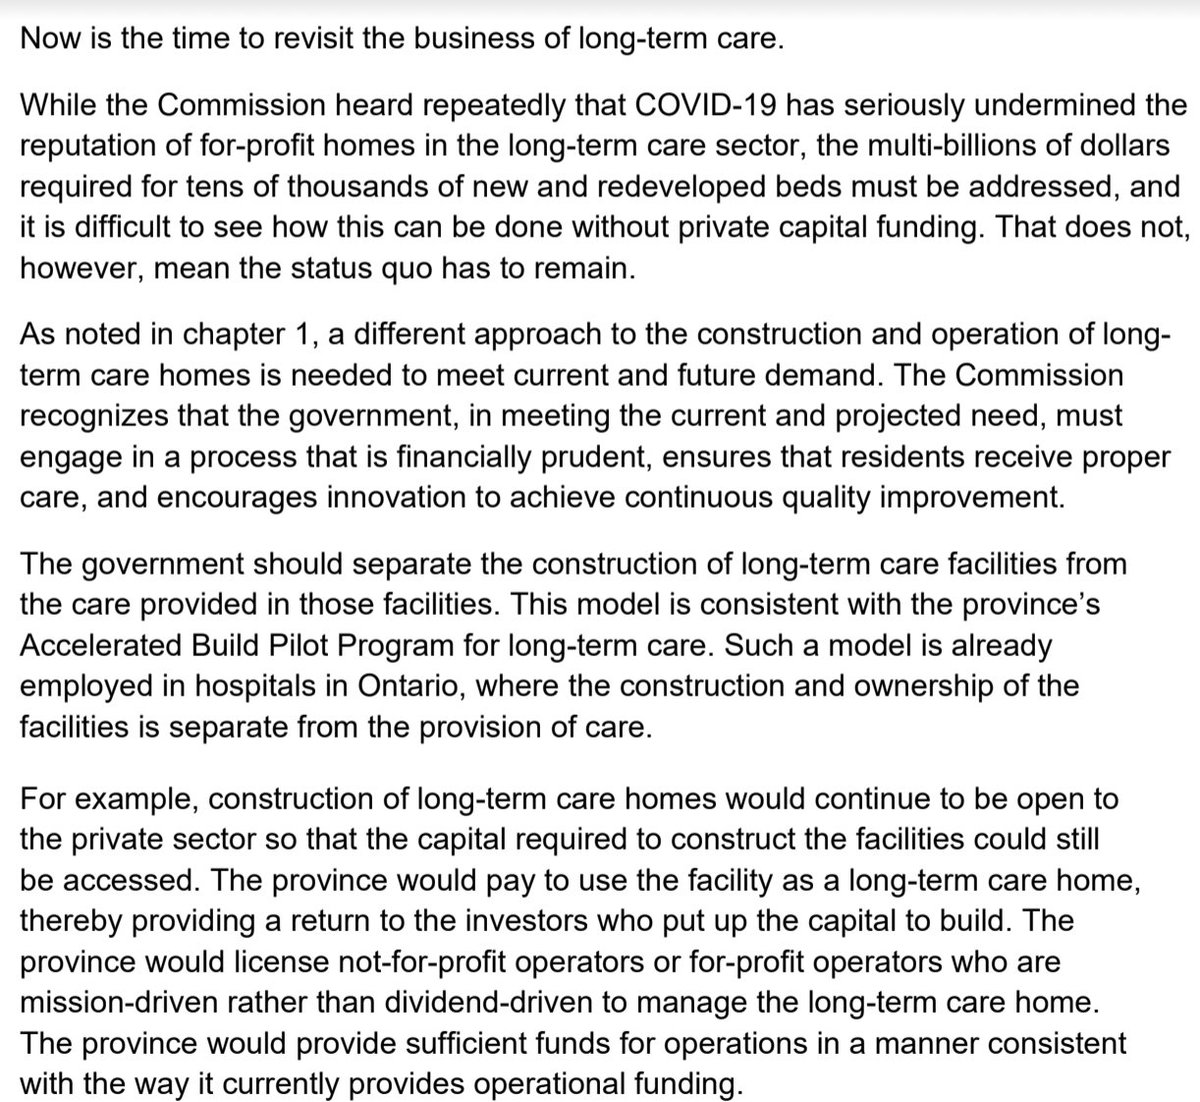 Also in the recommendations: "Now is the time to revisit the business of long-term care."